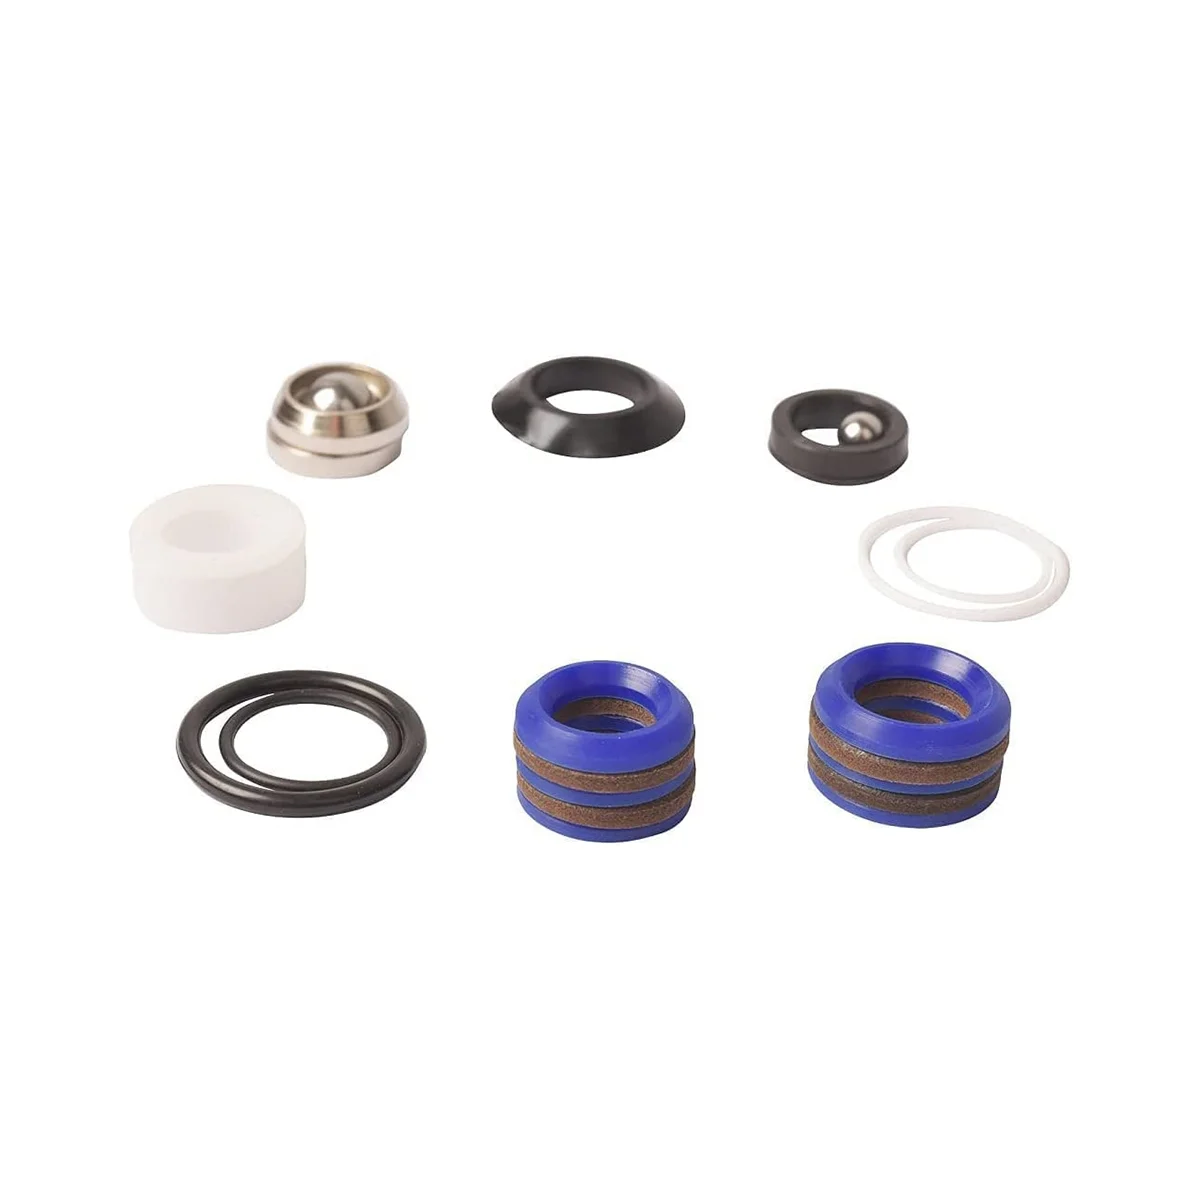 

244194 Pump Repair Packing Kit for Airless Paint Sprayer 295 390 395 490 495 595 3400 Aftermarket